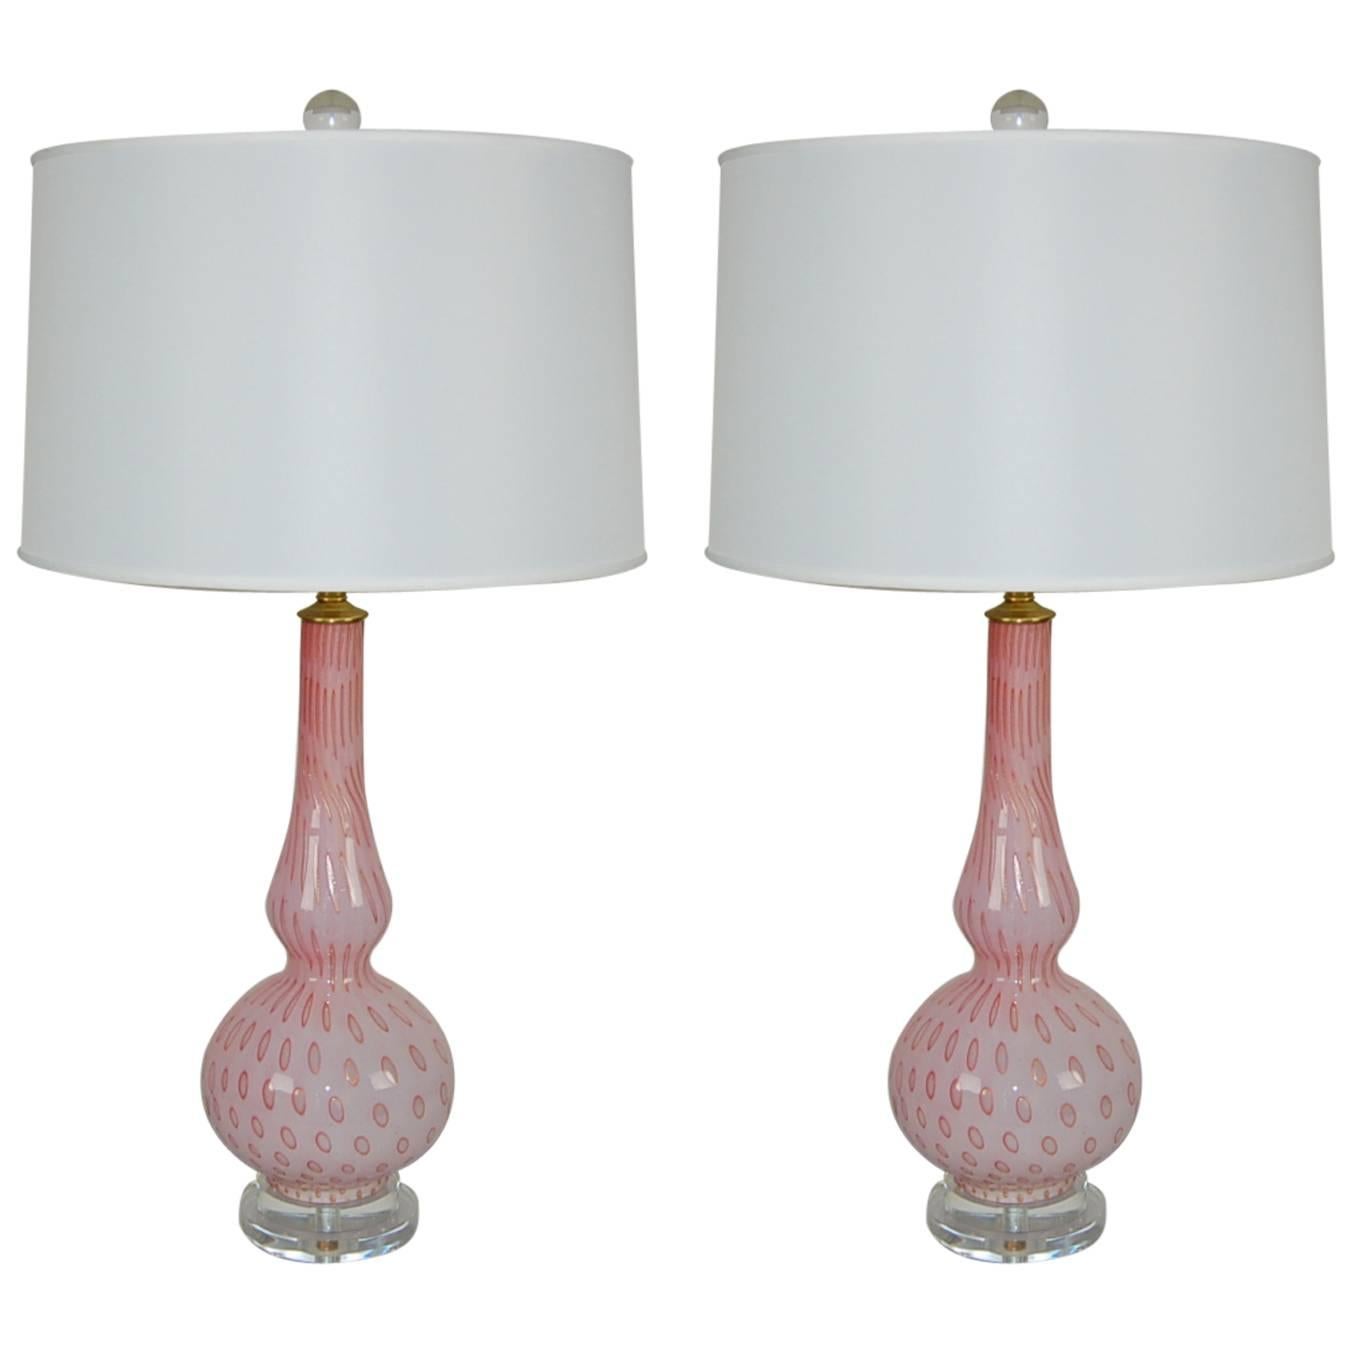 Matched Pair of Vintage Murano Lamps in Pink by Marbro